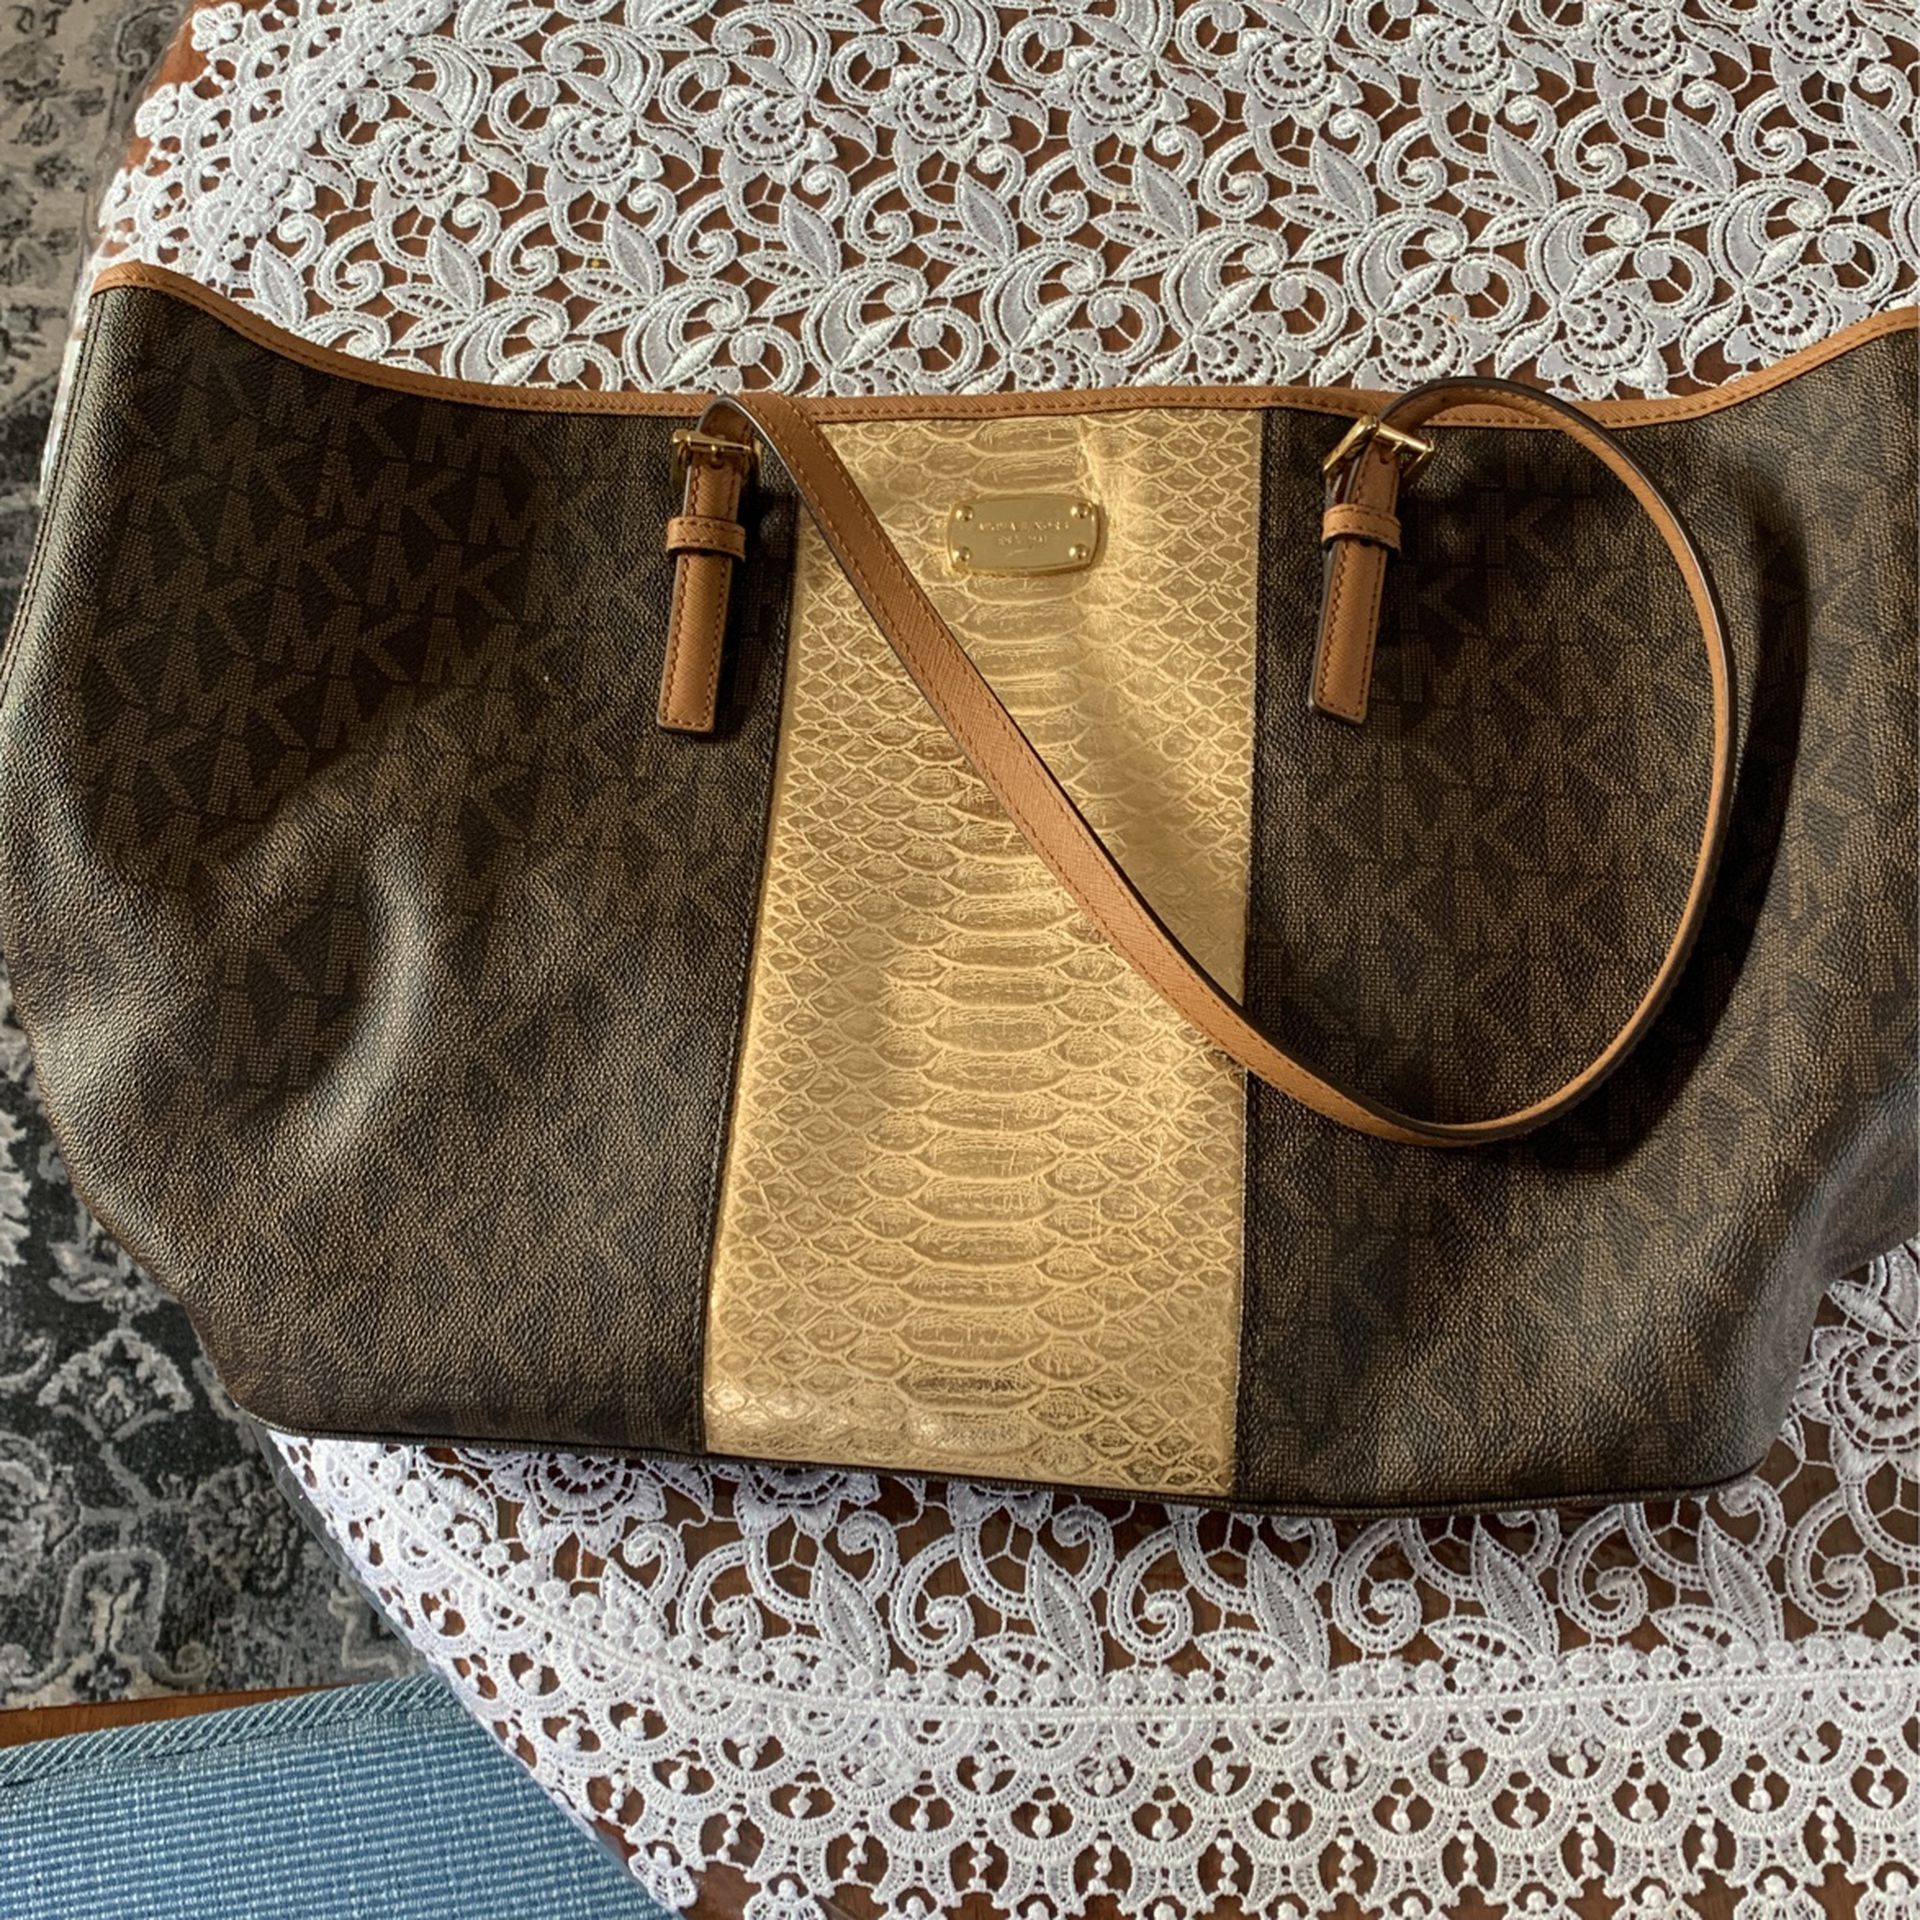 beautiful Michael Kors bag, large tote. Very good condition .